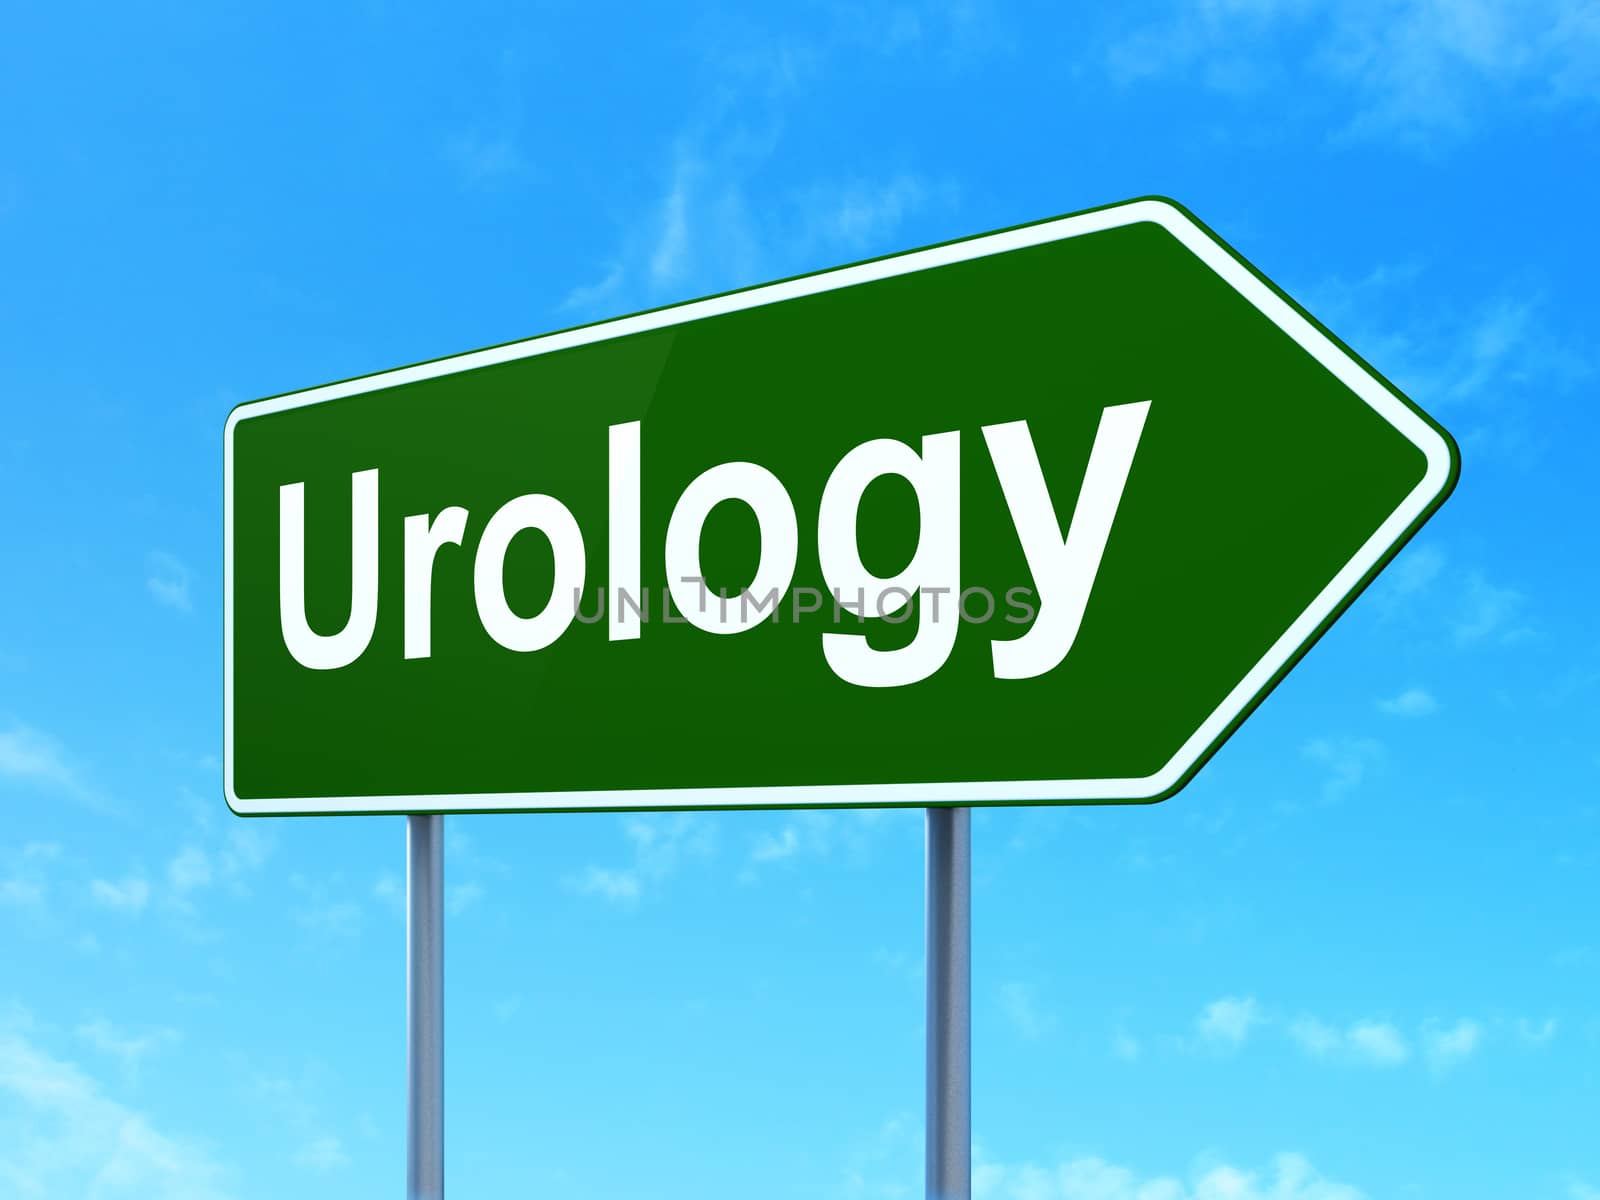 Healthcare concept: Urology on green road highway sign, clear blue sky background, 3D rendering